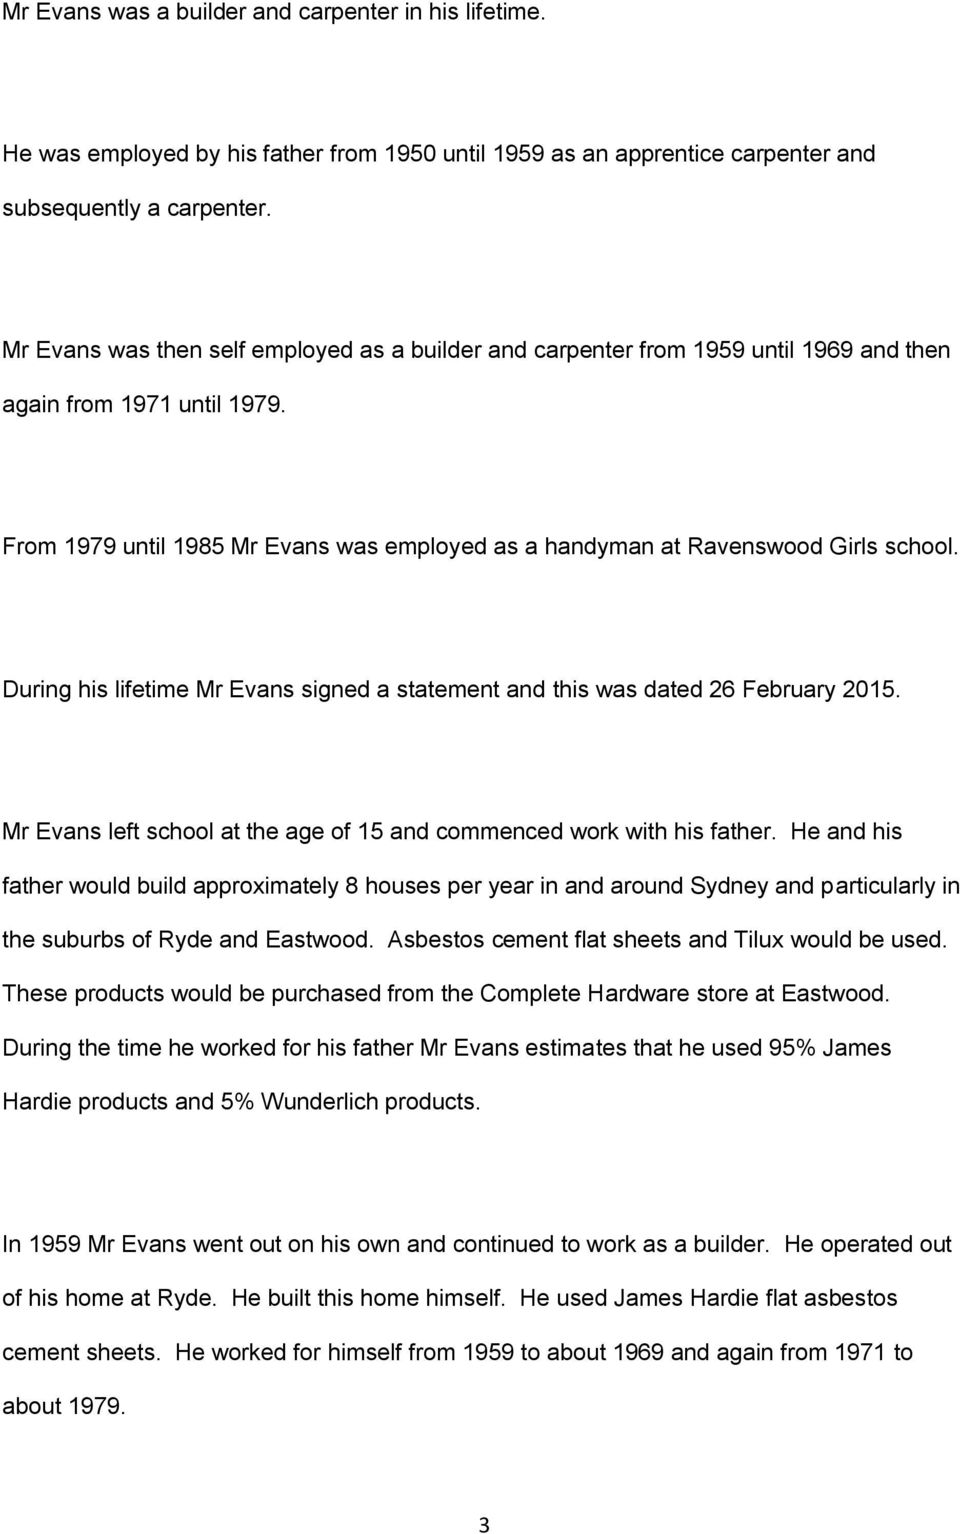 From 1979 until 1985 Mr Evans was employed as a handyman at Ravenswood Girls school. During his lifetime Mr Evans signed a statement and this was dated 26 February 2015.